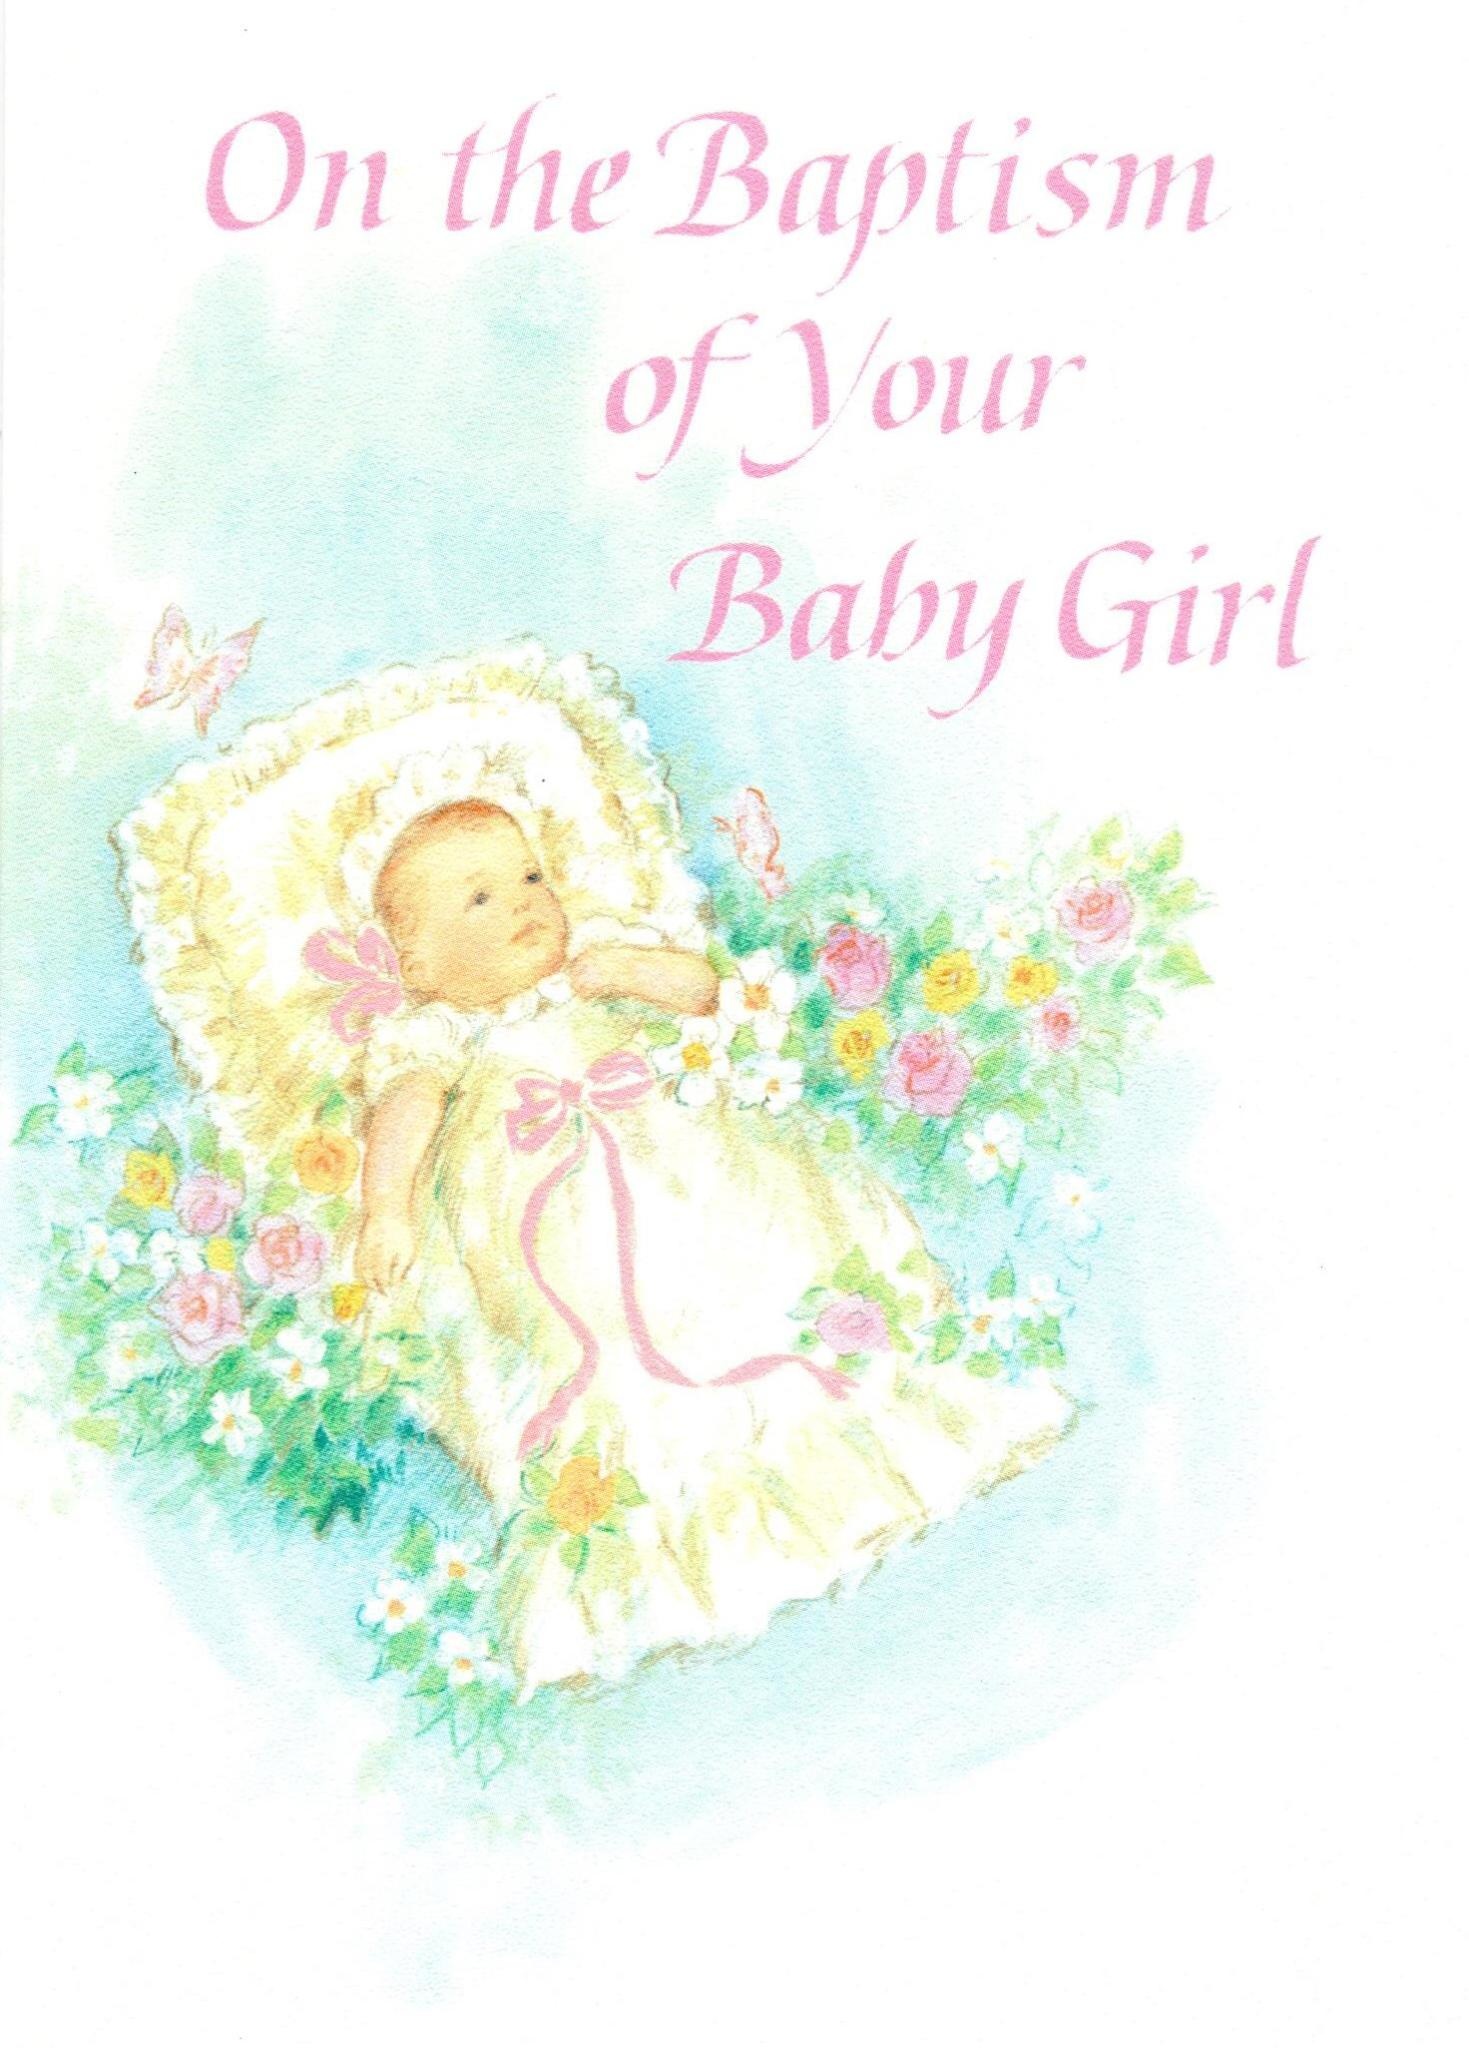 On the Baptism of your Baby Girl